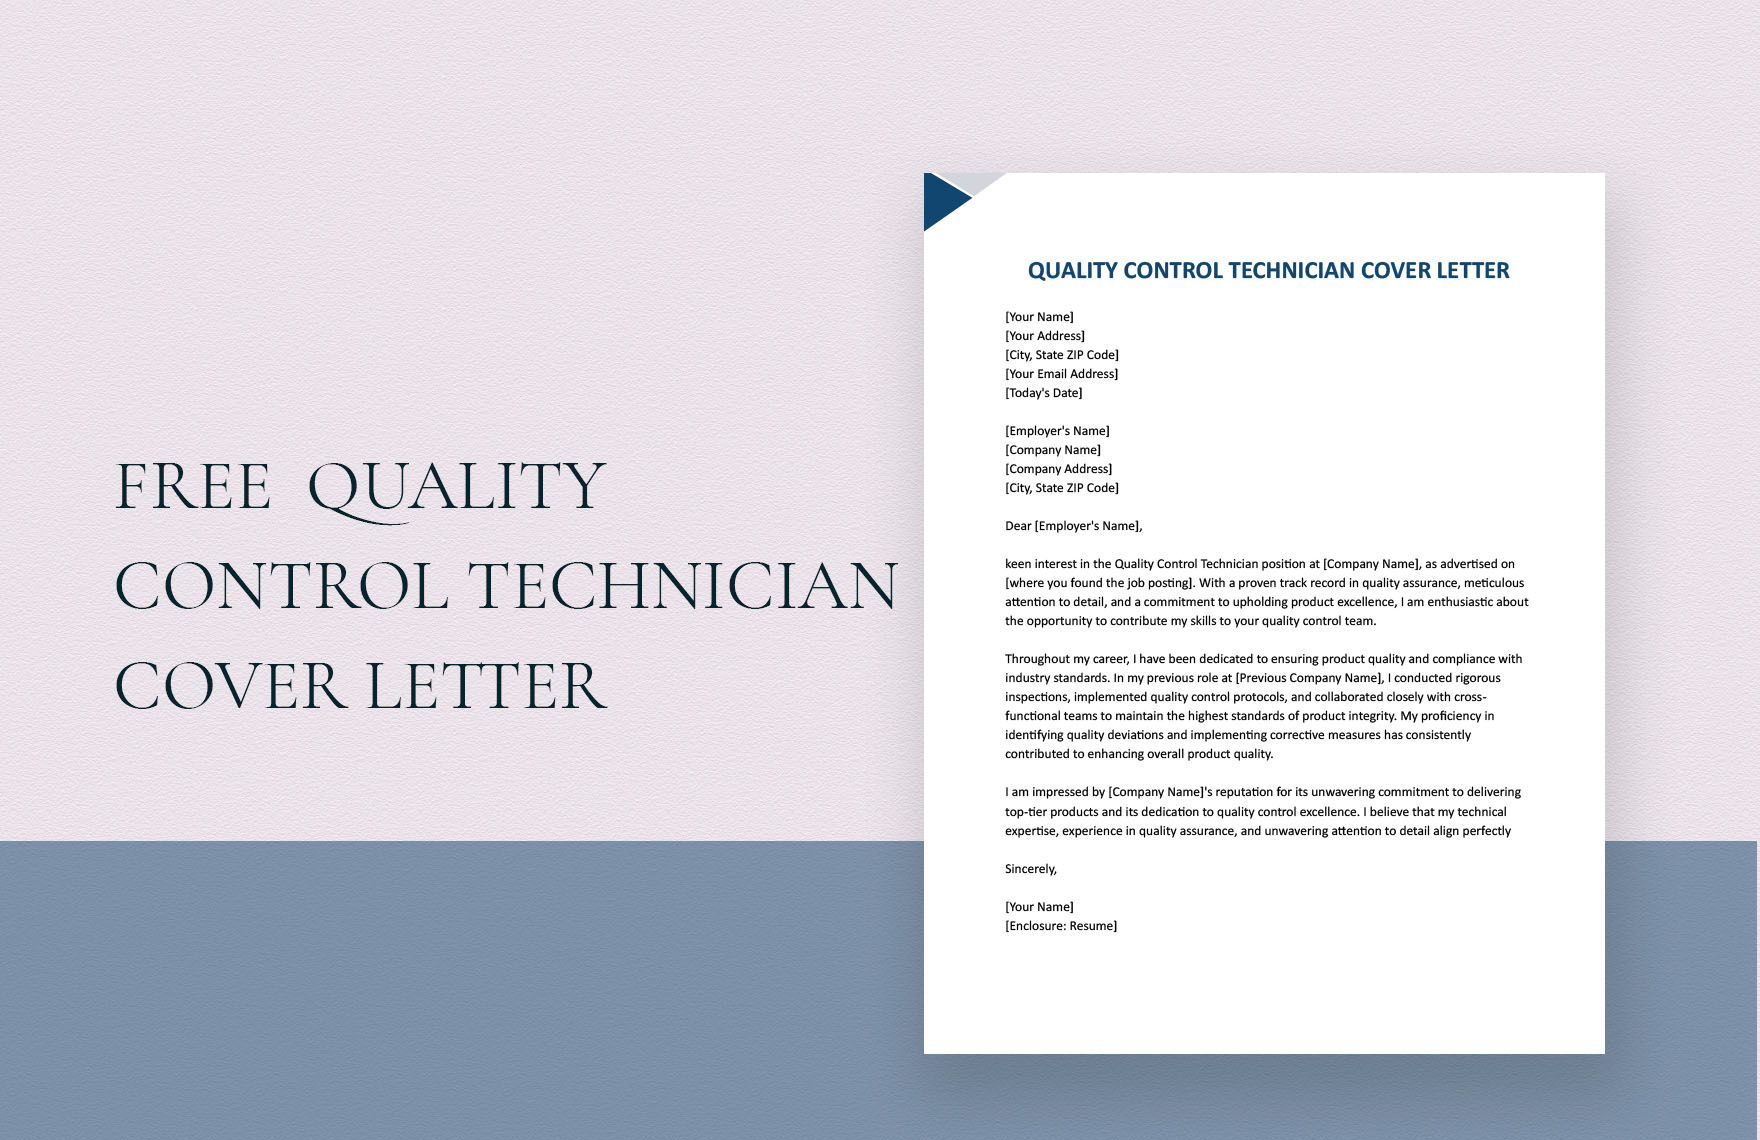 Quality Control Technician Cover Letter